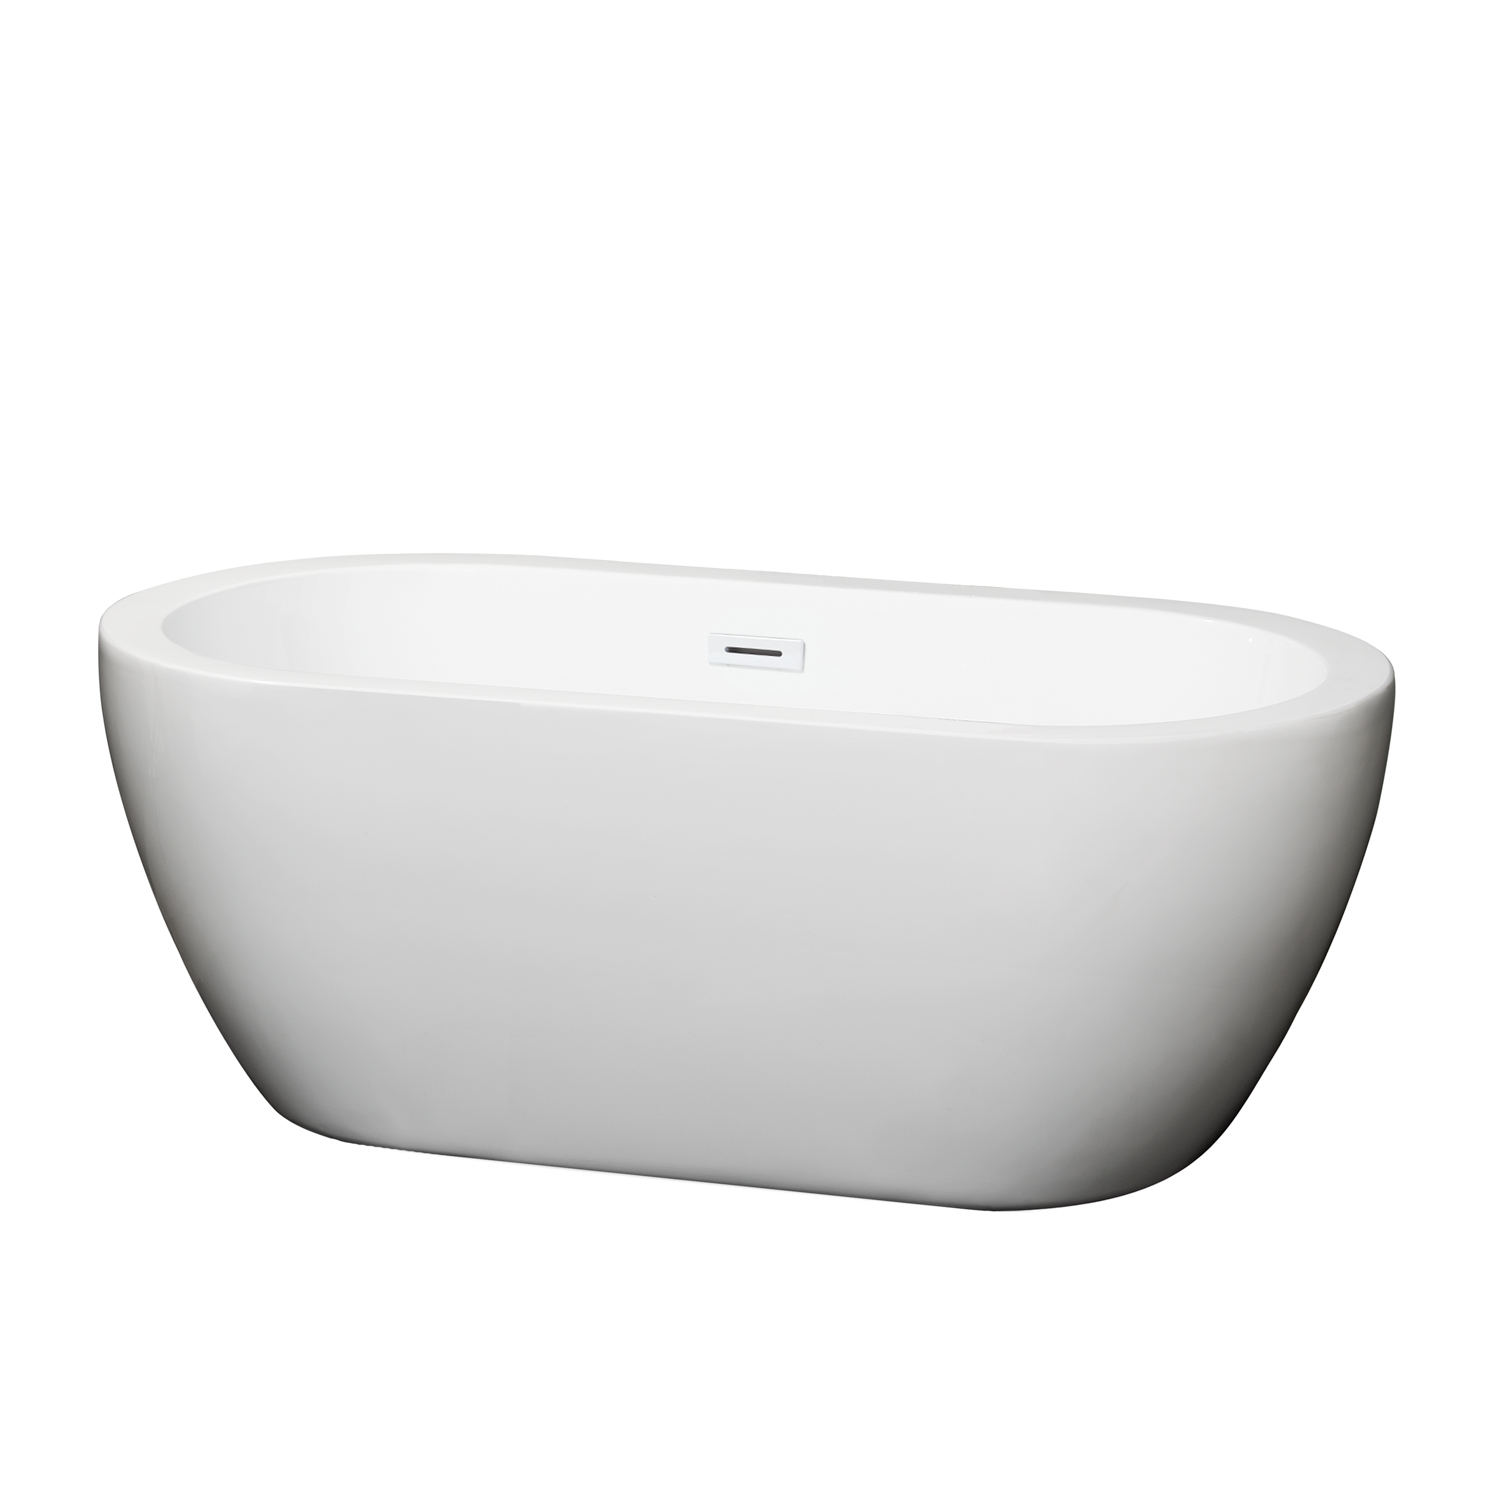 60" Freestanding Bathtub in White with Shiny White Drain and Overflow Trim Finish